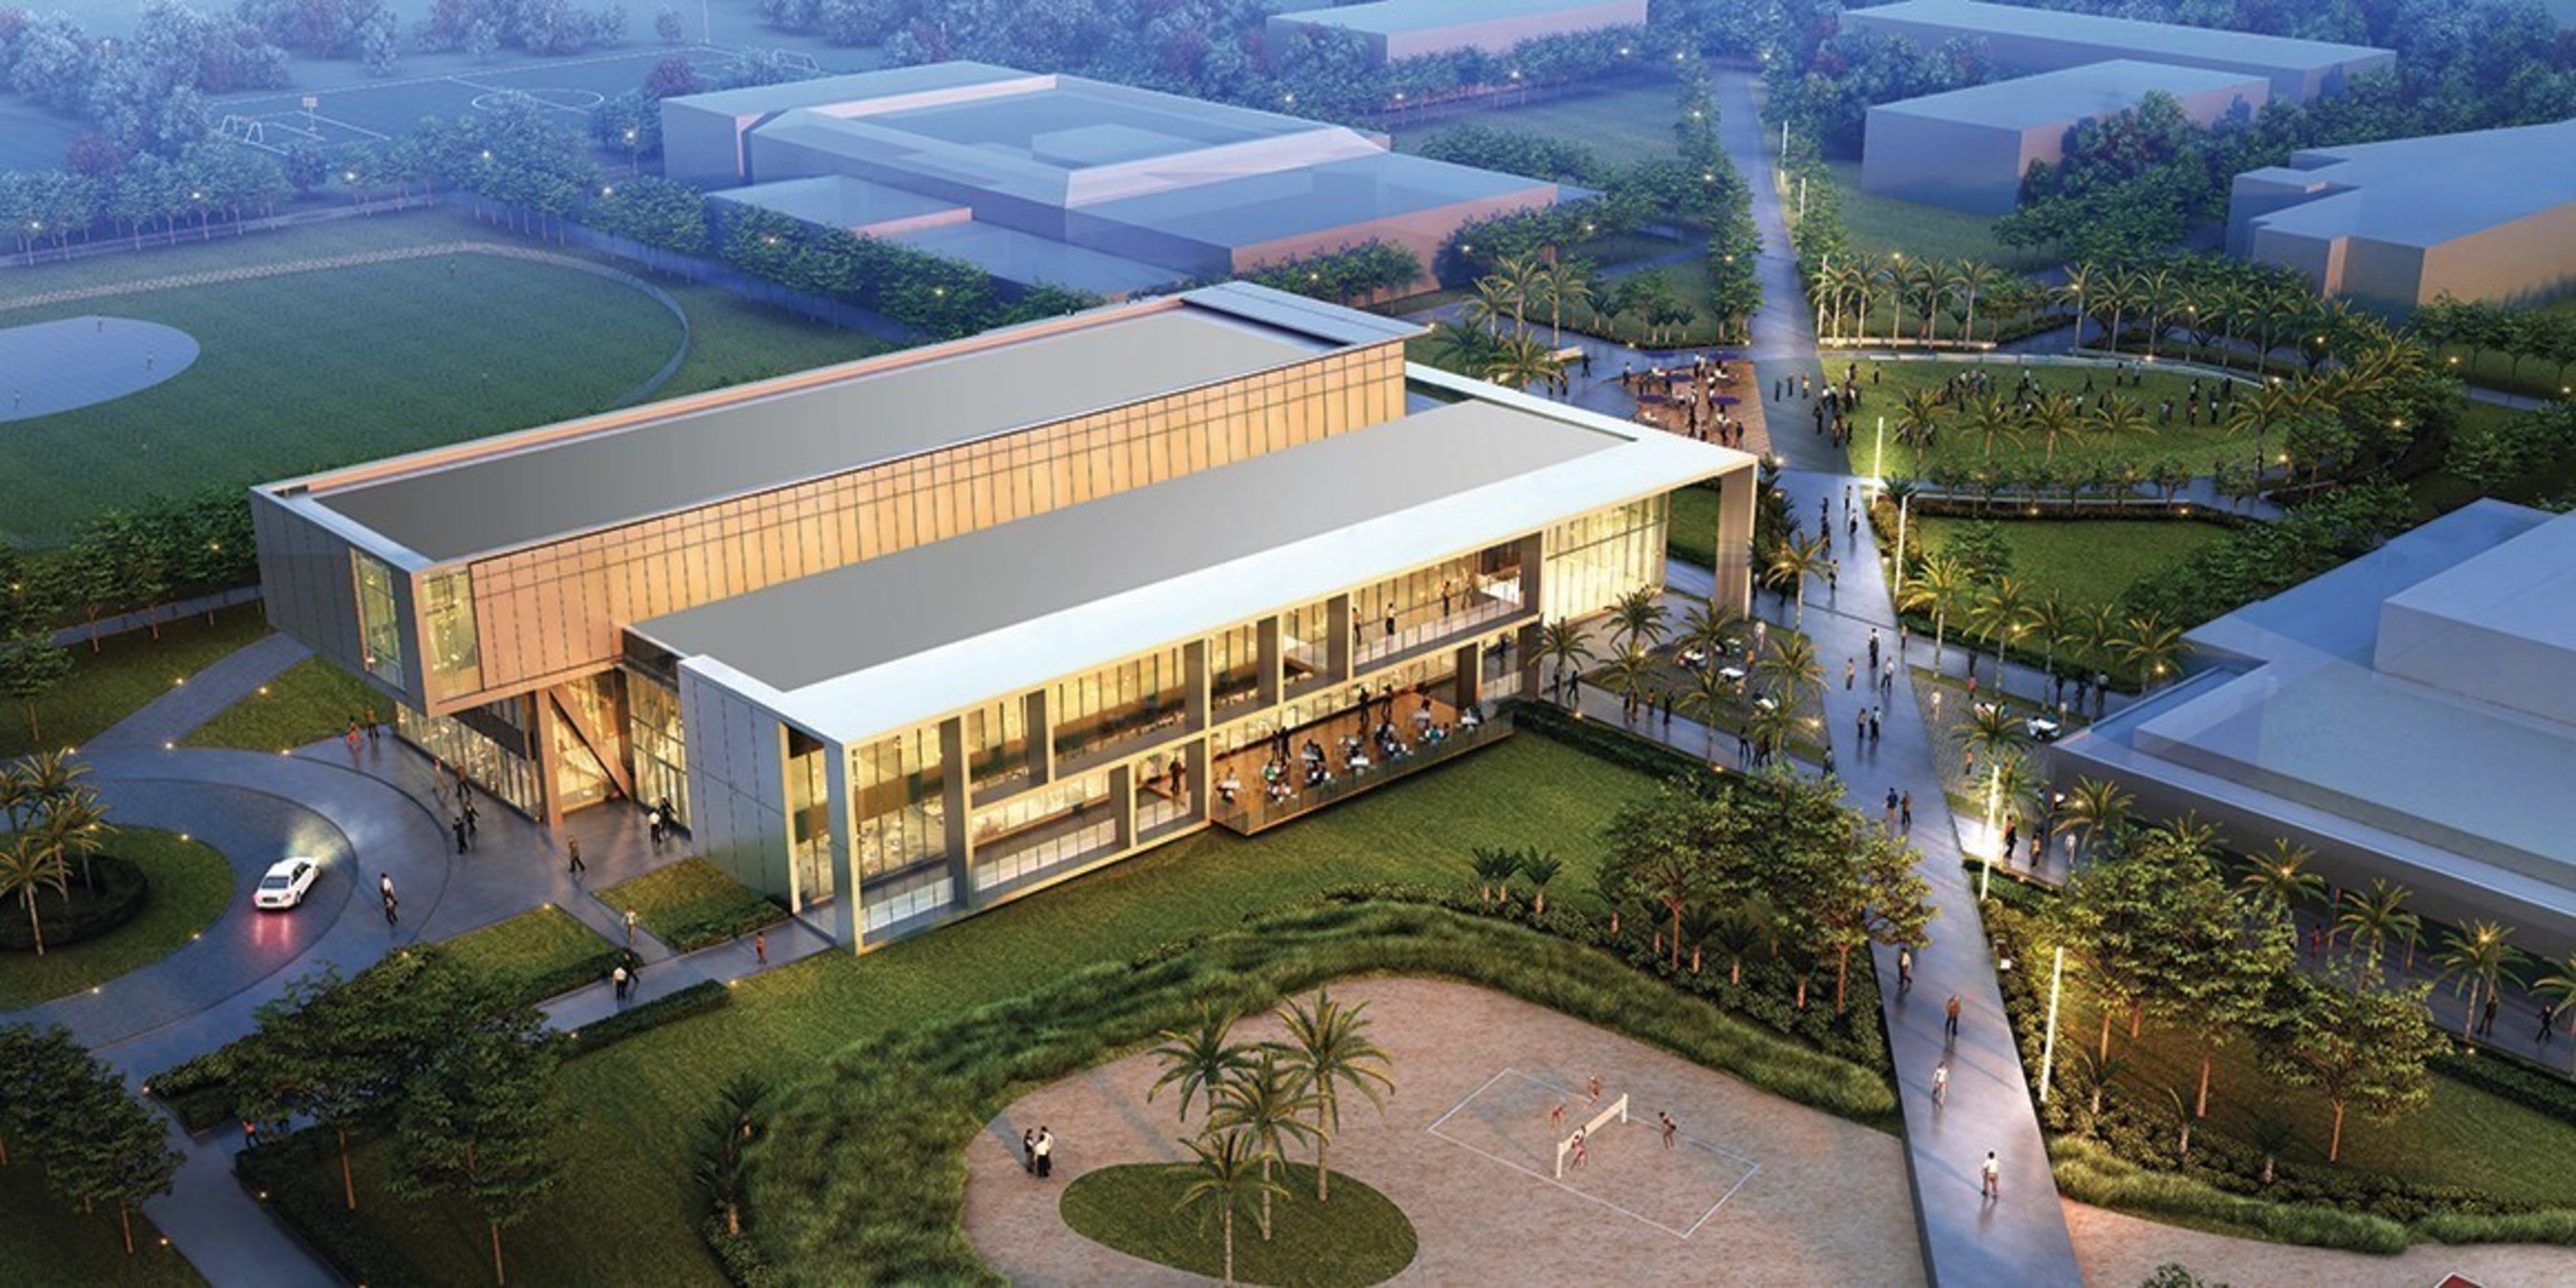 The Christine E. Lynn University Center is slated to open on Lynn's campus in 2018.